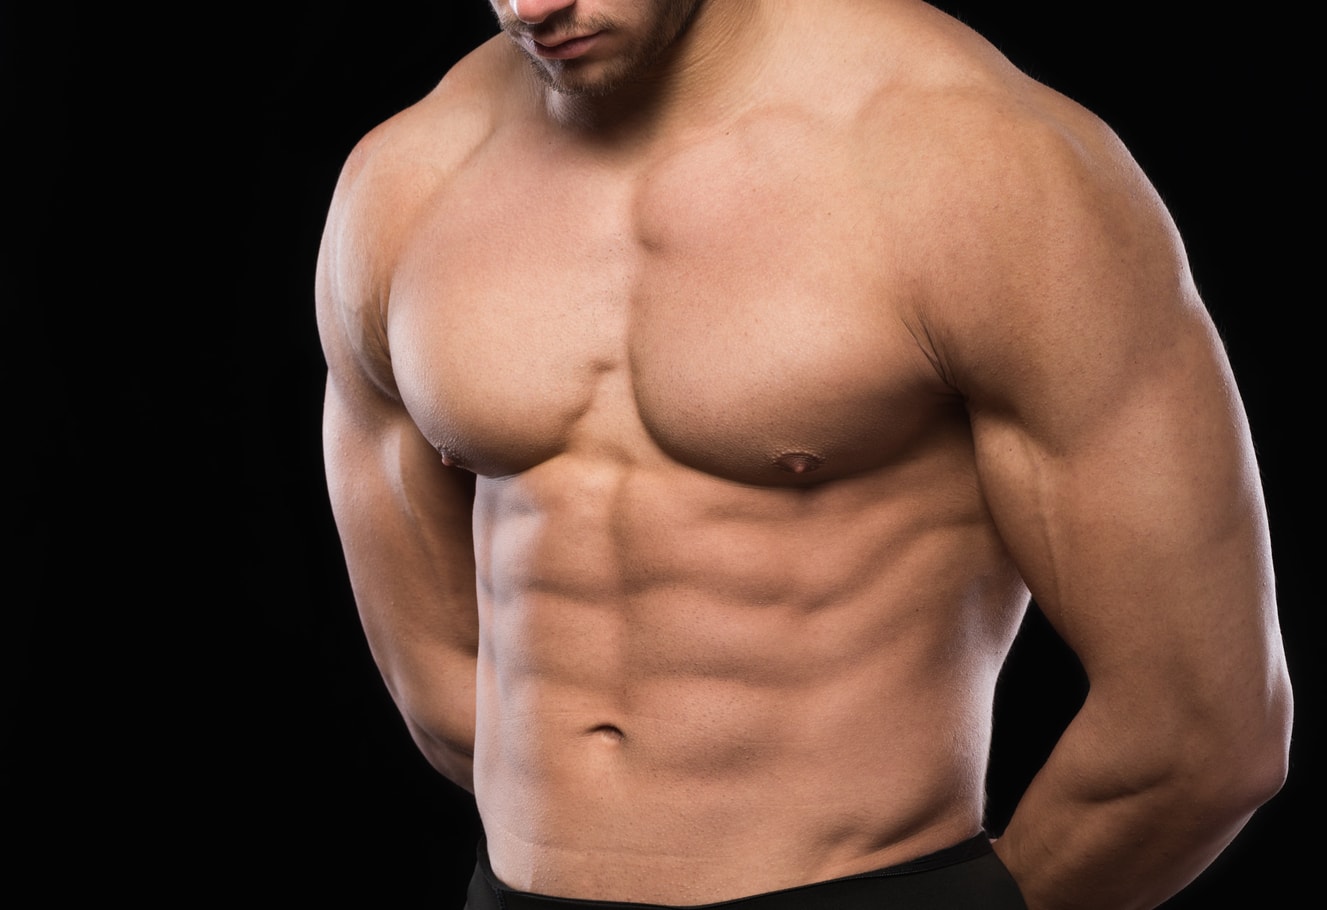 Abdominal Etching for Male Body Contouring